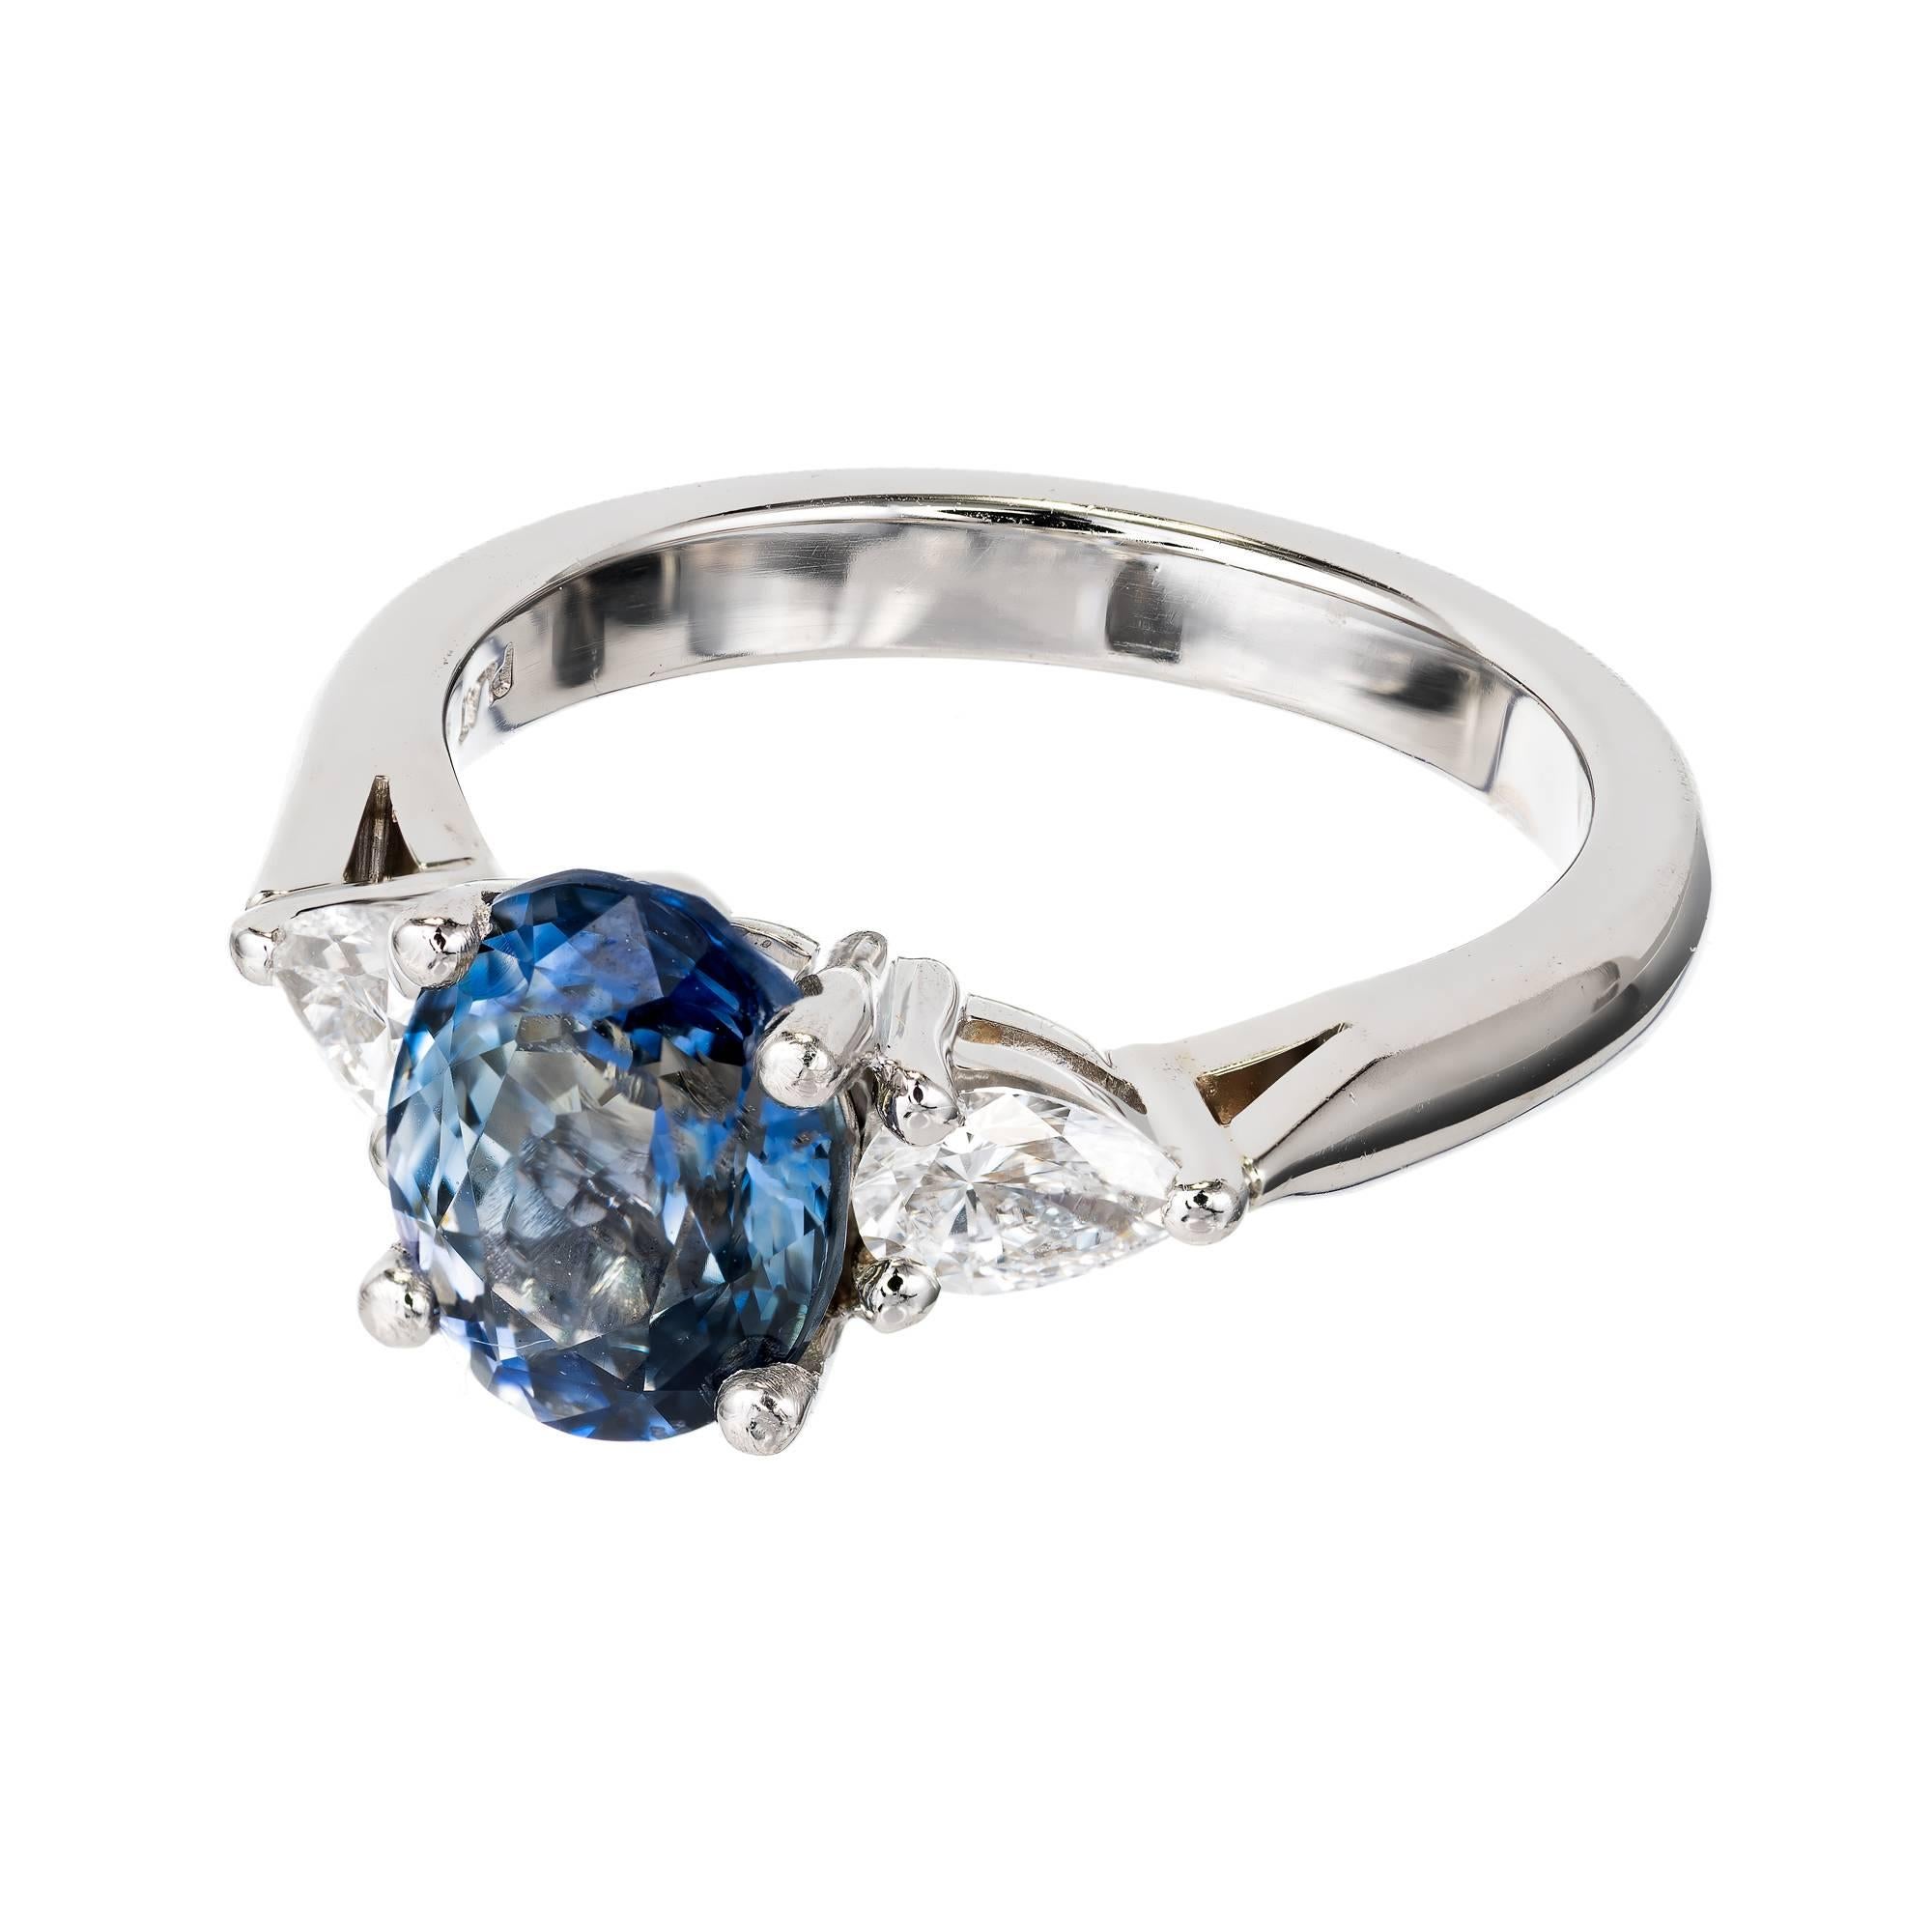 Peter Suchy 2.35 Carat Blue Sapphire Pear Diamond Platinum Engagement Ring In Good Condition For Sale In Stamford, CT